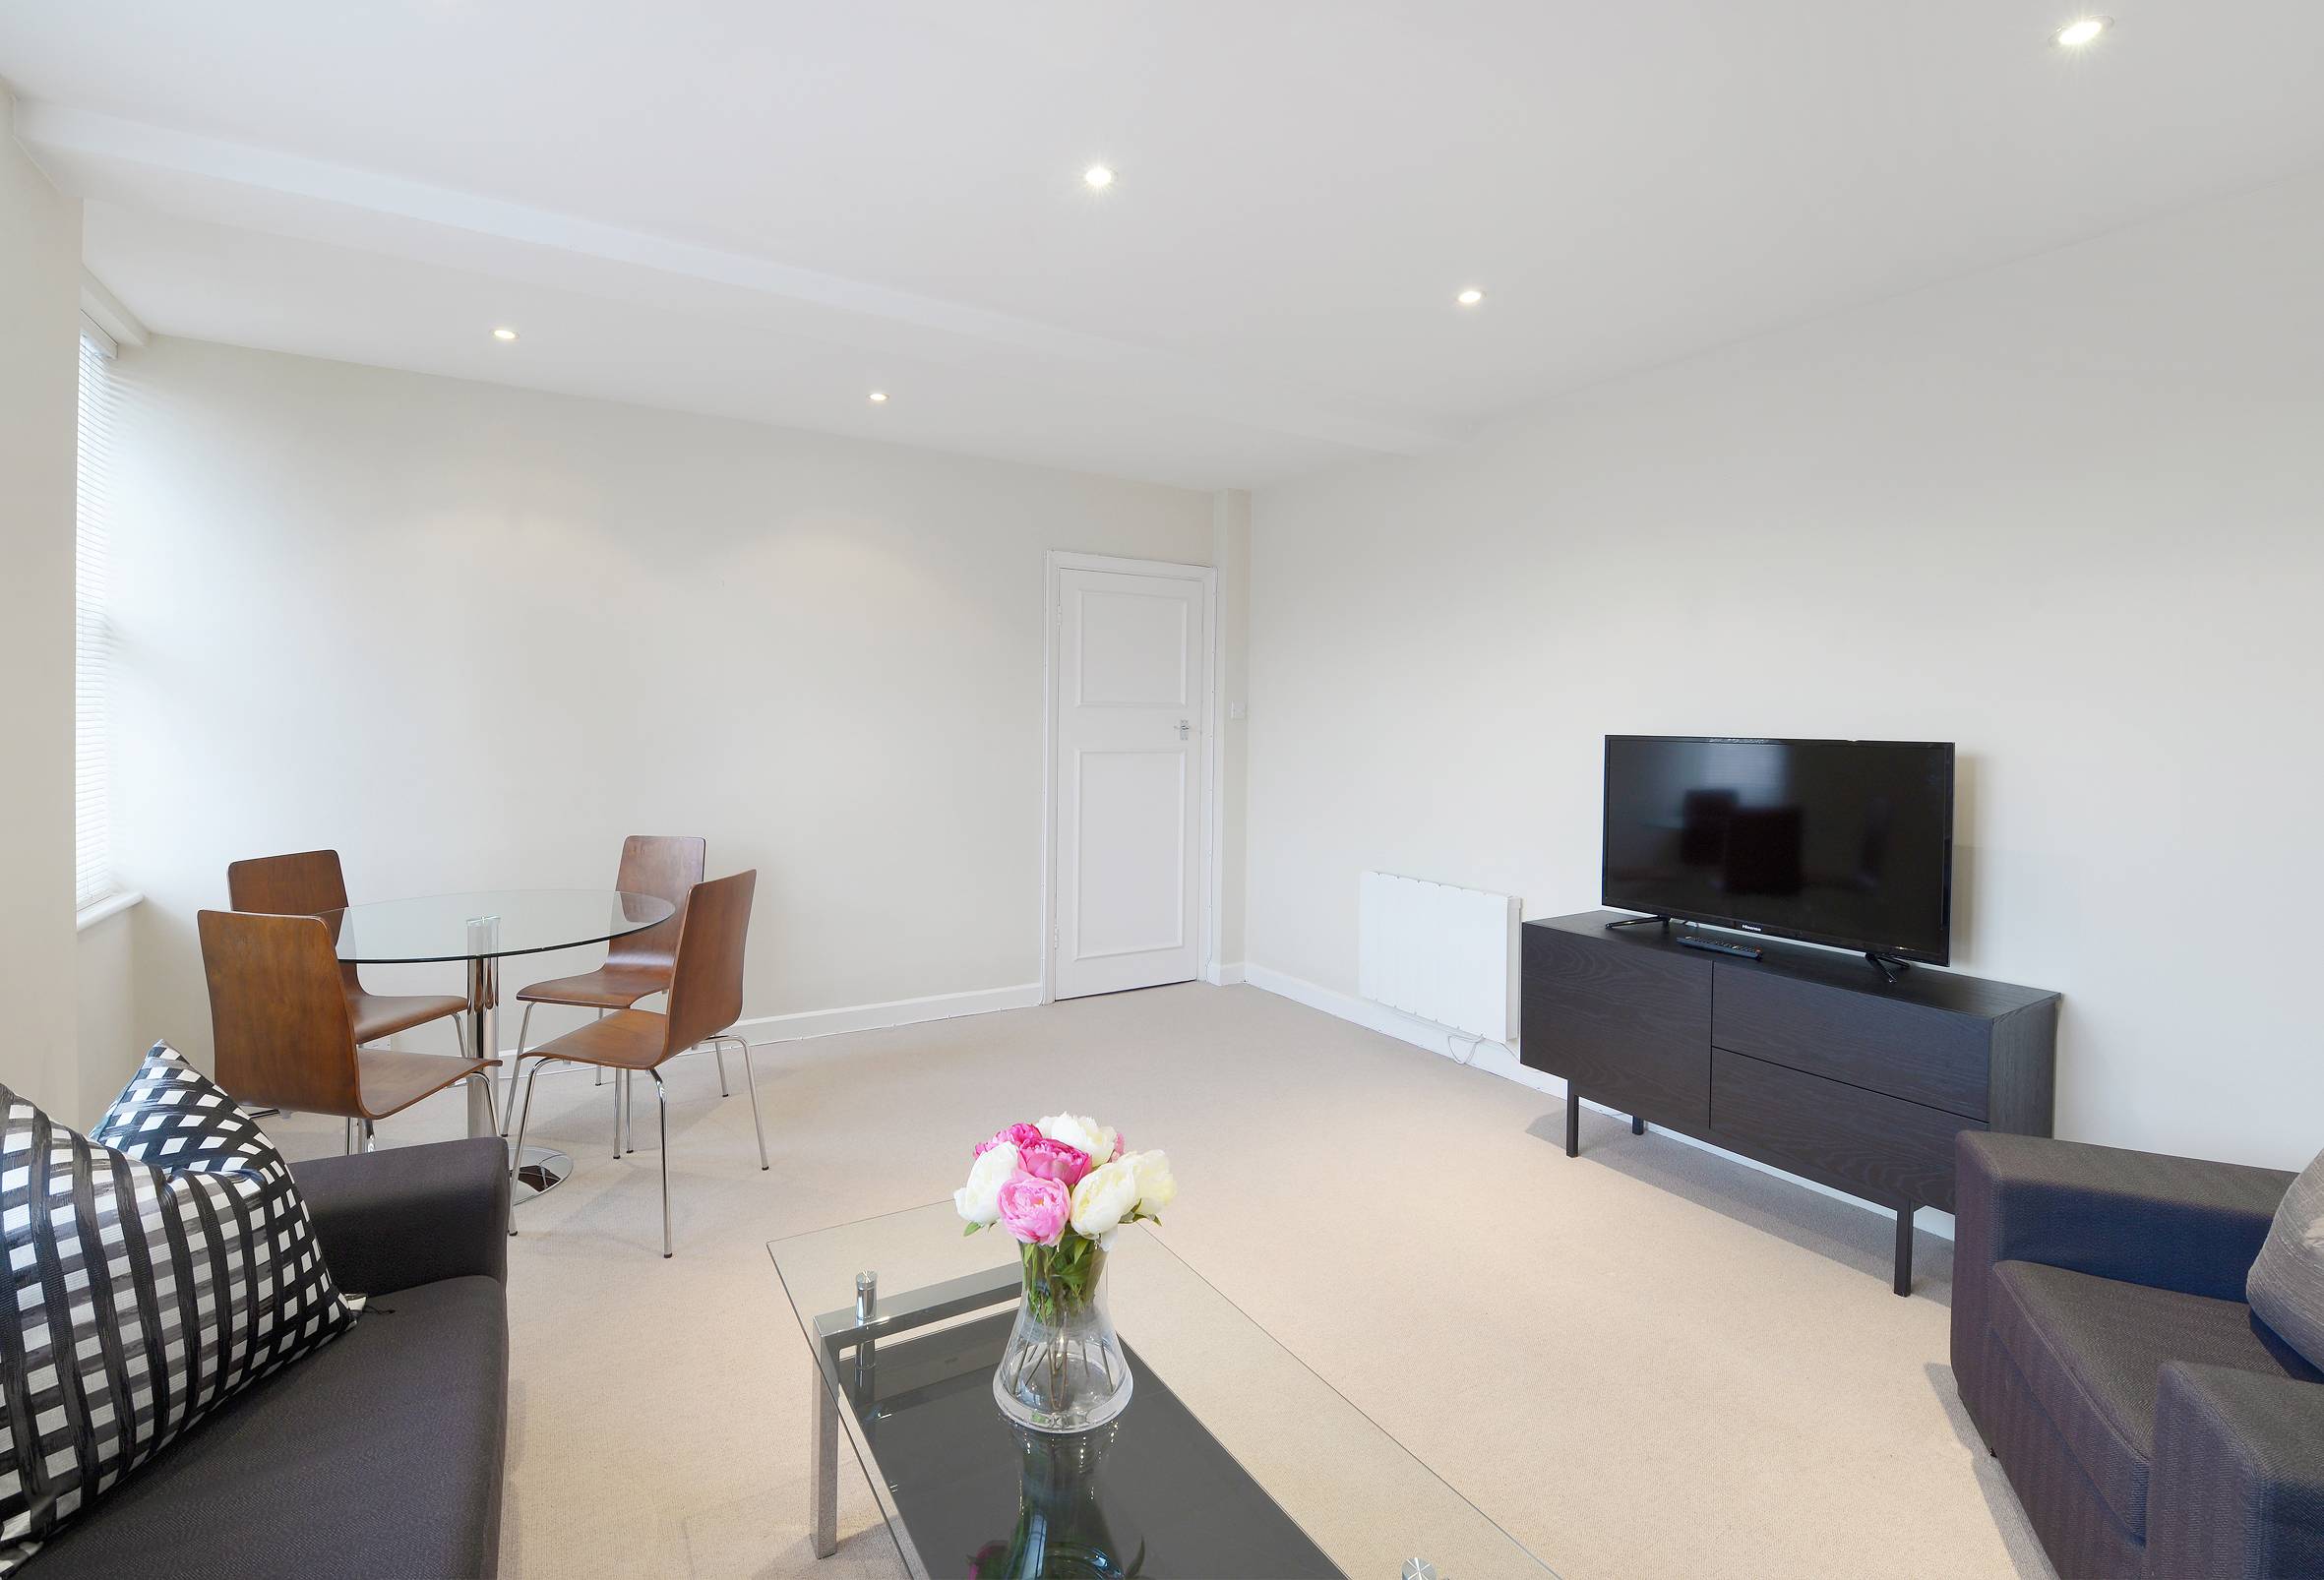 Two bedroom conversion apartment in Mayfair